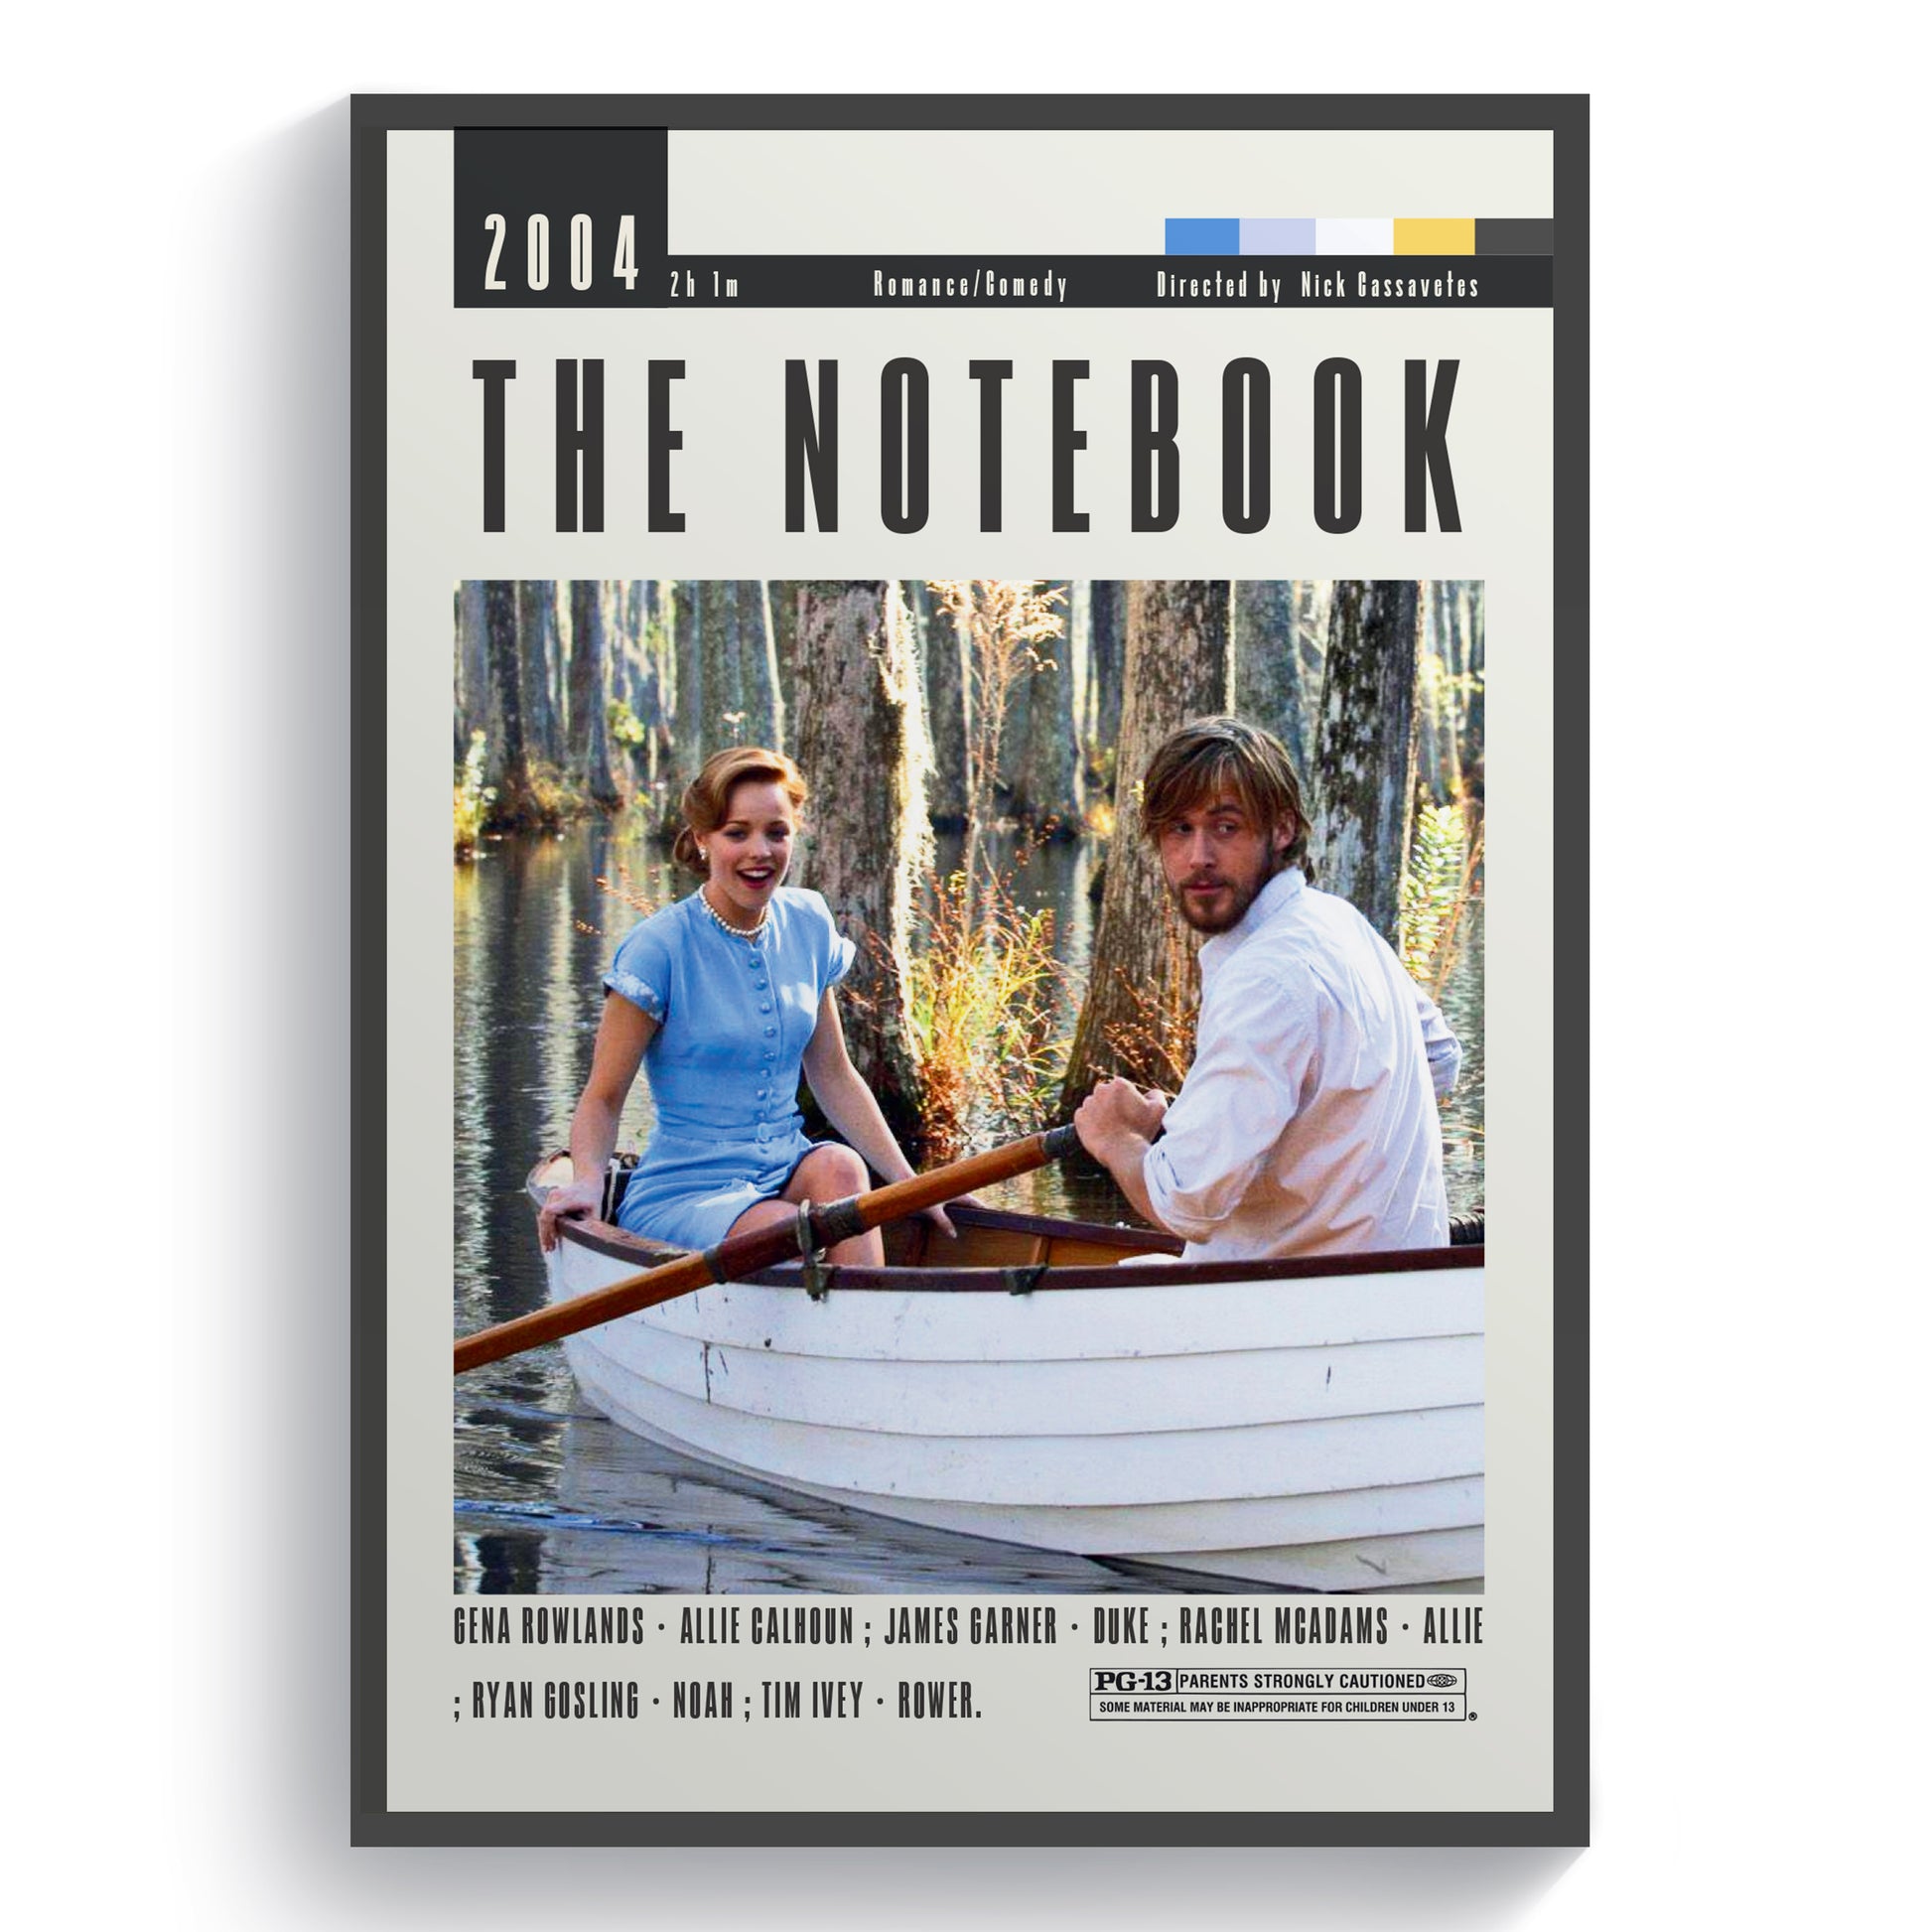 Expertly designed for fans of Nick Gassavetes movies, The Notebook Posters are the perfect addition to any movie lover's collection. Featuring stunning imagery and crisp details, these posters bring your favorite films to life and make the perfect statement piece for any room. Elevate your movie viewing experience with these beautiful and professionally crafted posters.